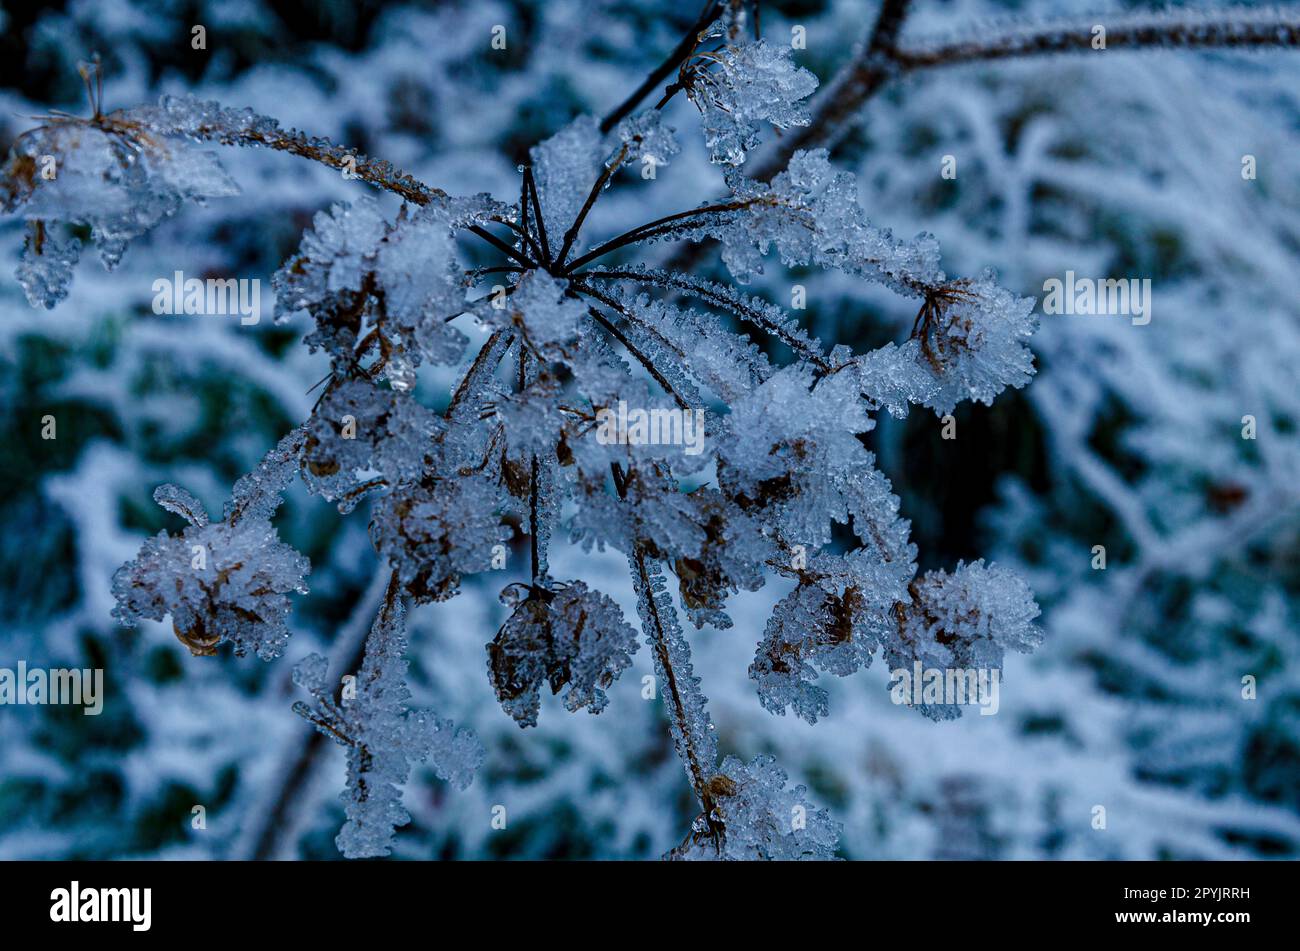 Ice covered plant close-up with depth of field Stock Photo